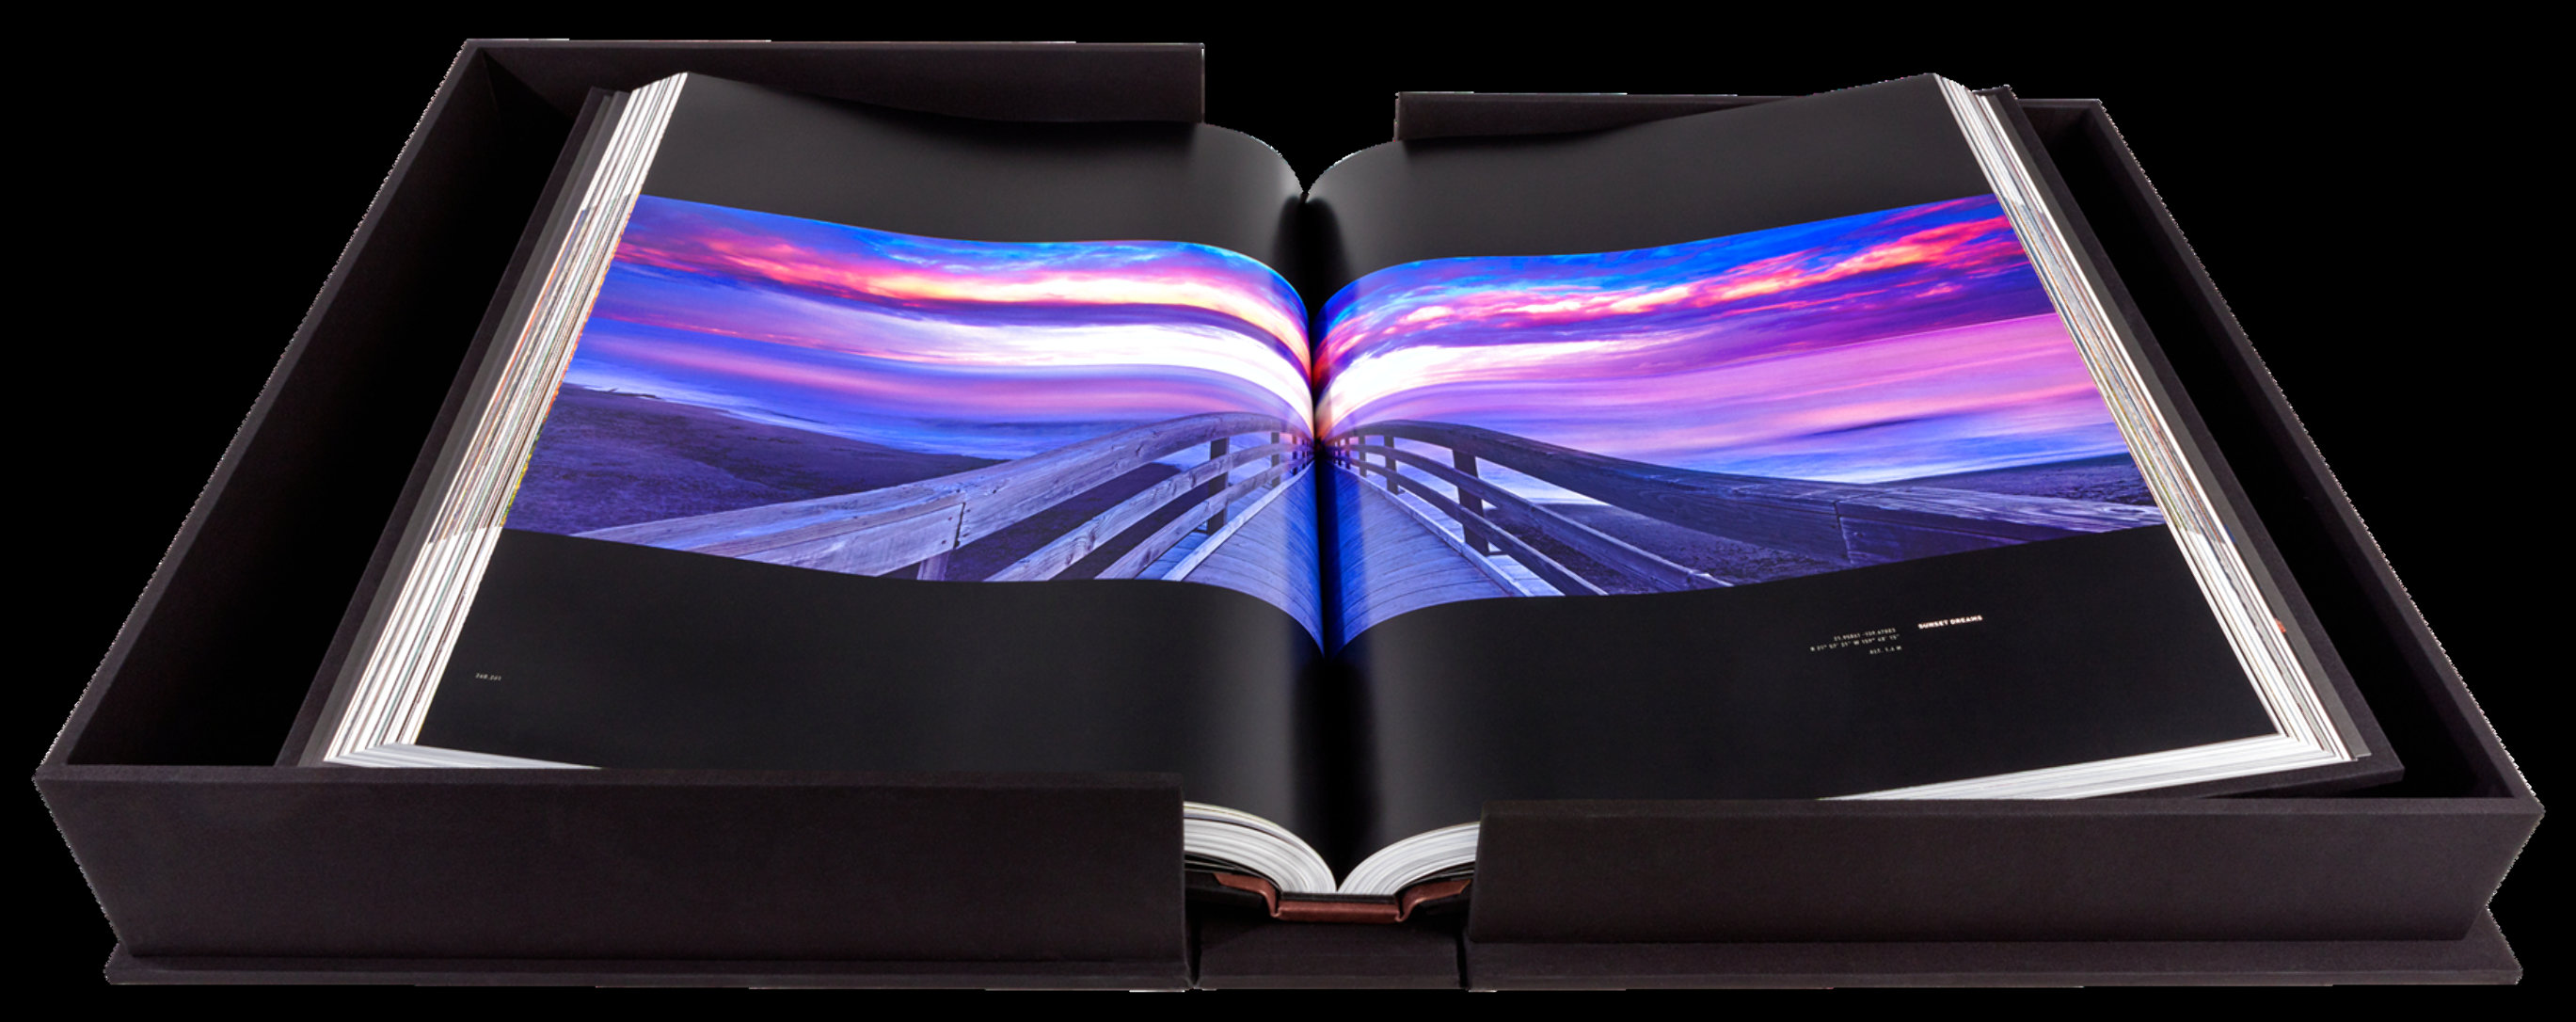 Equation of Time Book  Other by Peter Lik